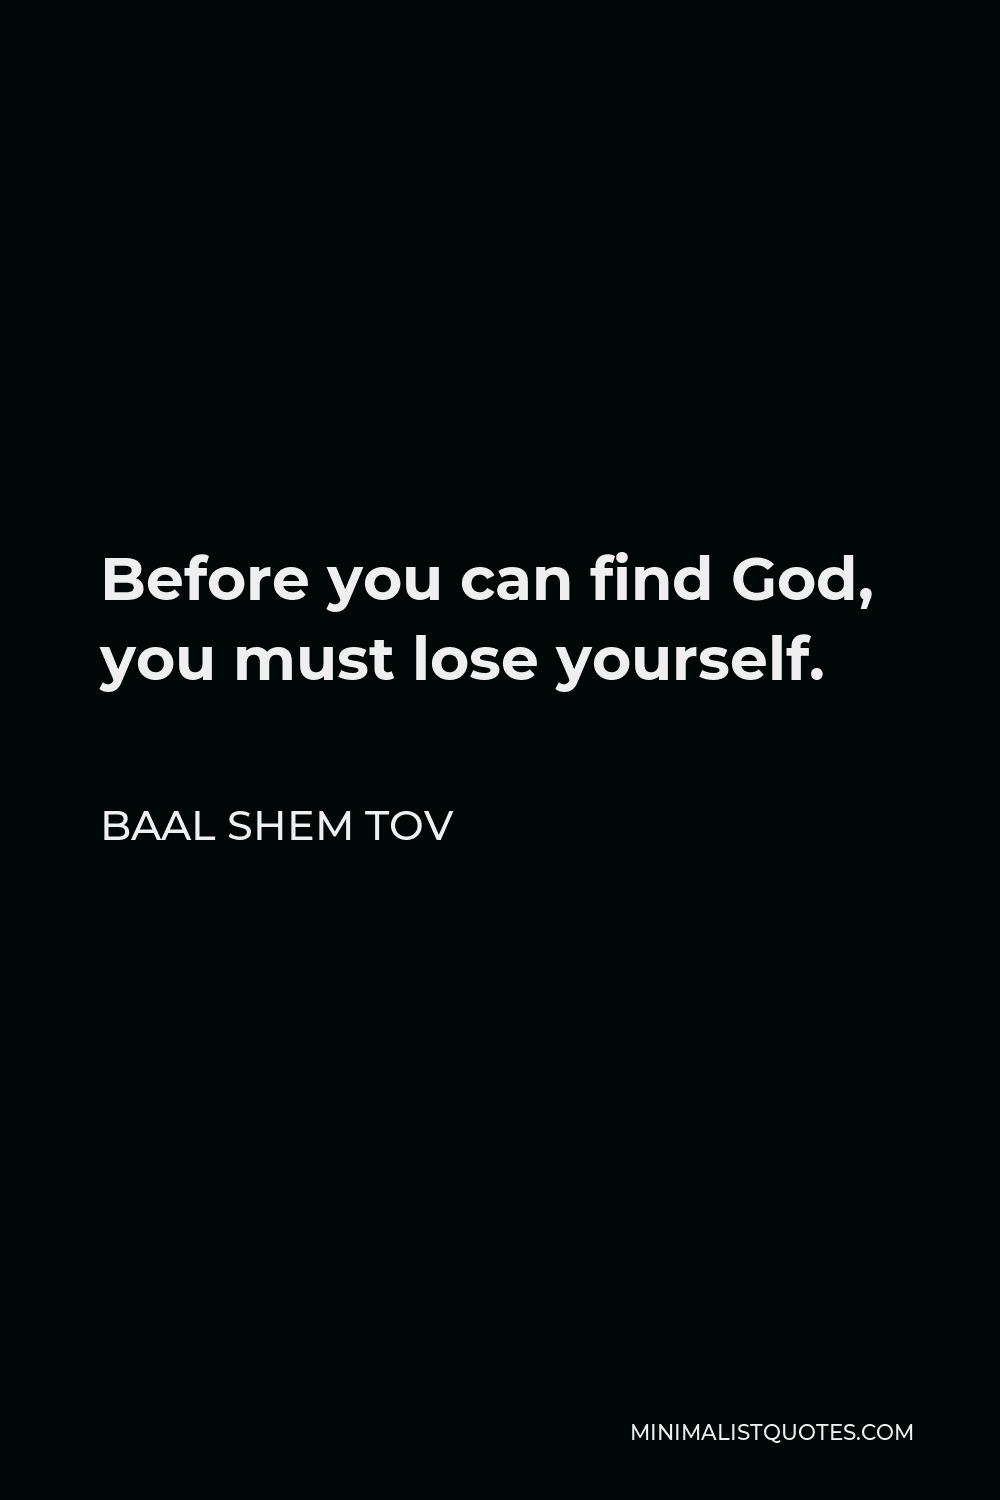 Baal Shem Tov Quote - Before you can find God, you must lose yourself.